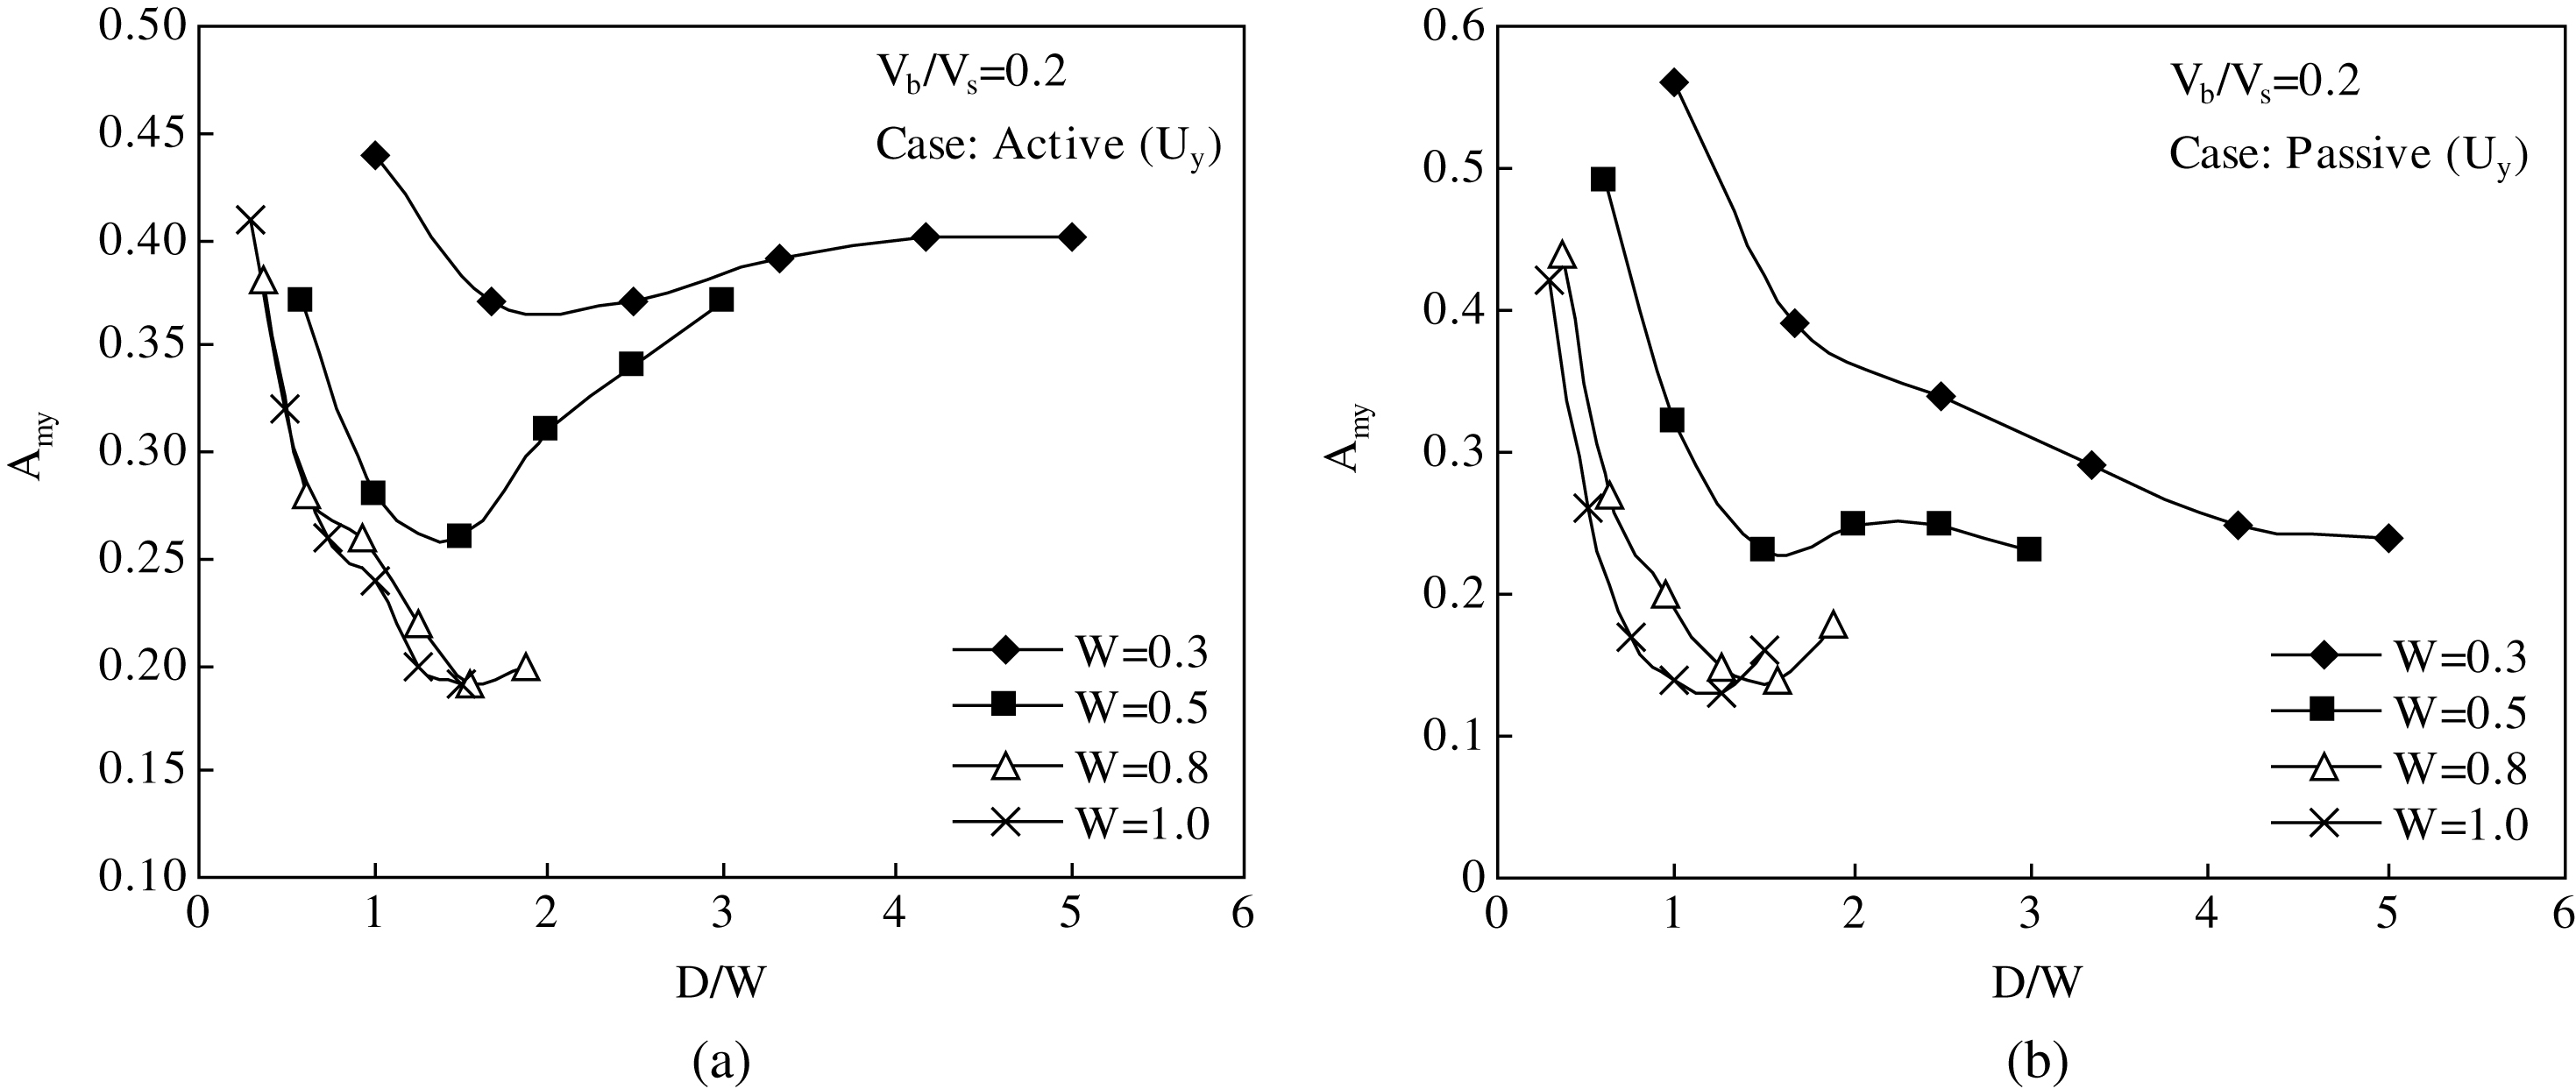 Effect of D/W on reducing vertical vibration in (a) active case (b) passive case.